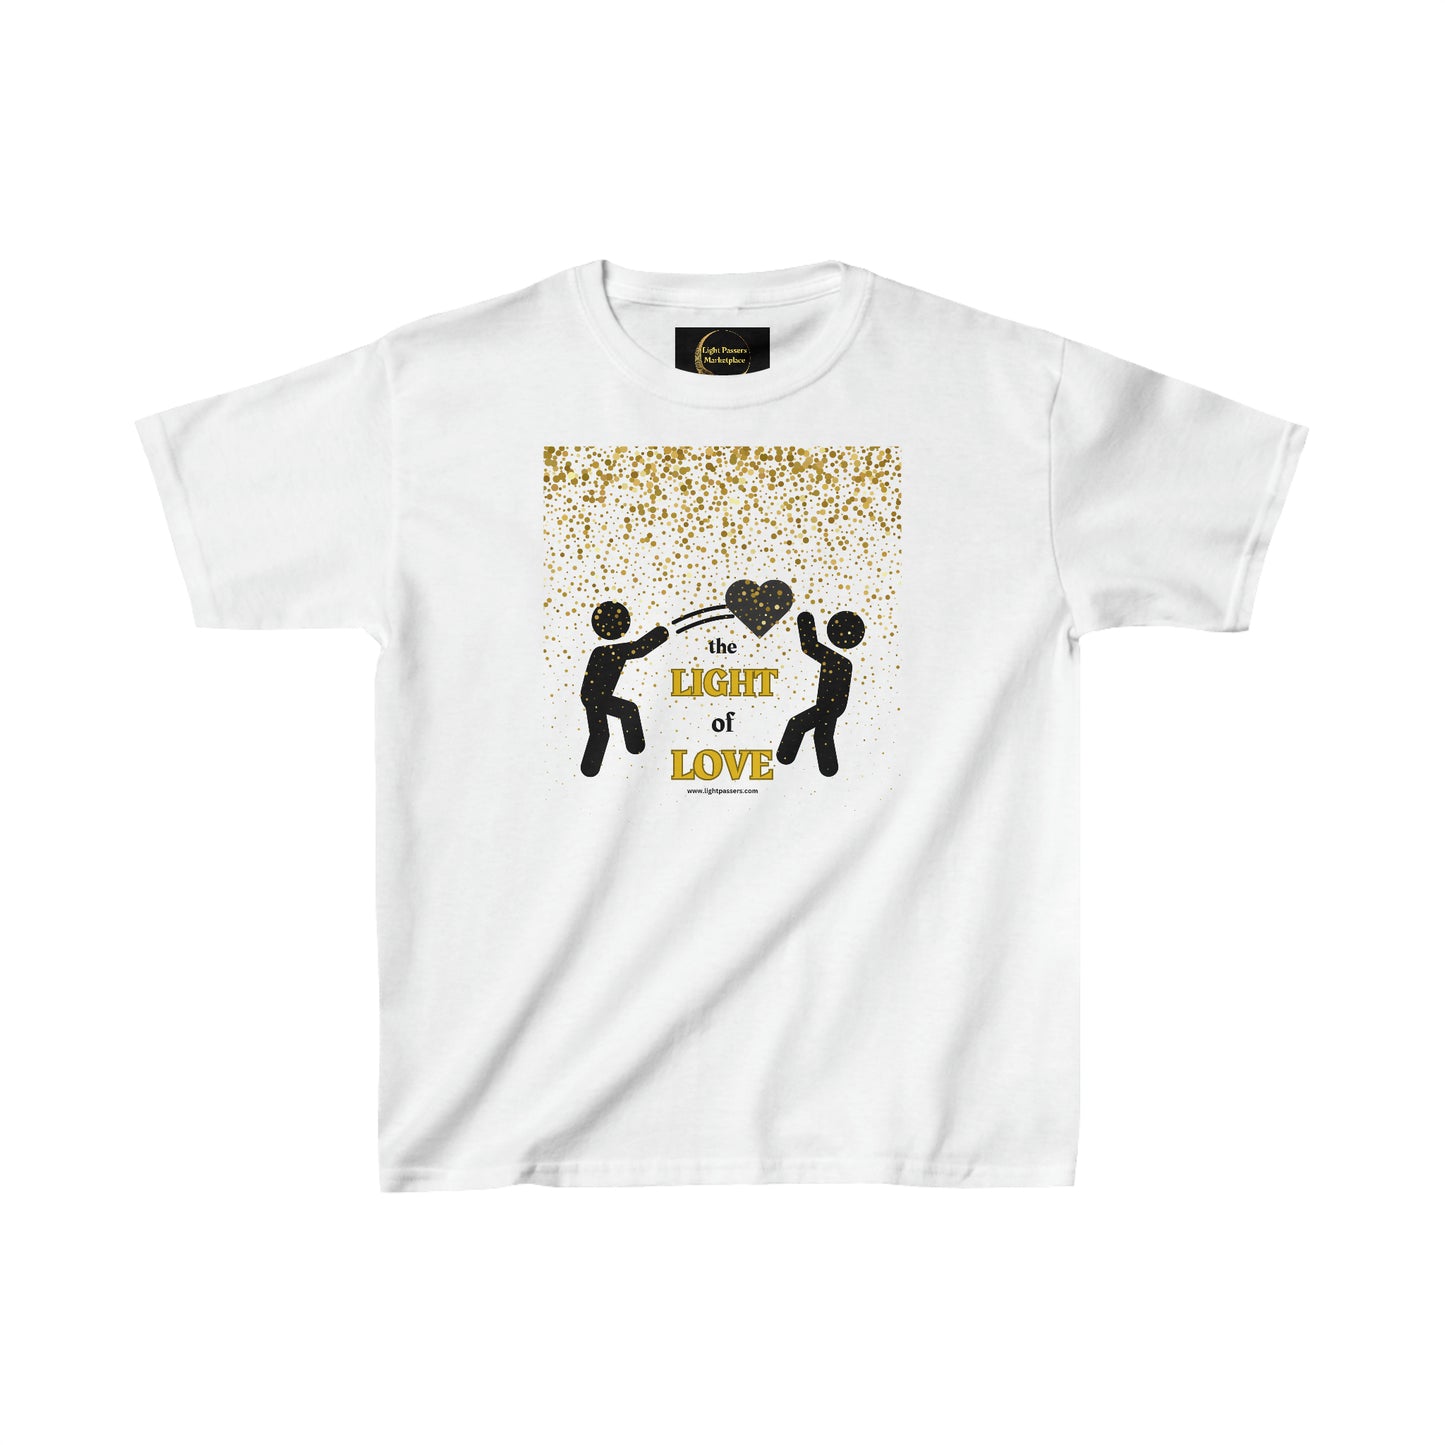 Light Passers Marketplace Gold Heart "Pass the Light of Love" Youth Heavy Cotton™ T-shirt Simple Messages, Mental Health, Fitness